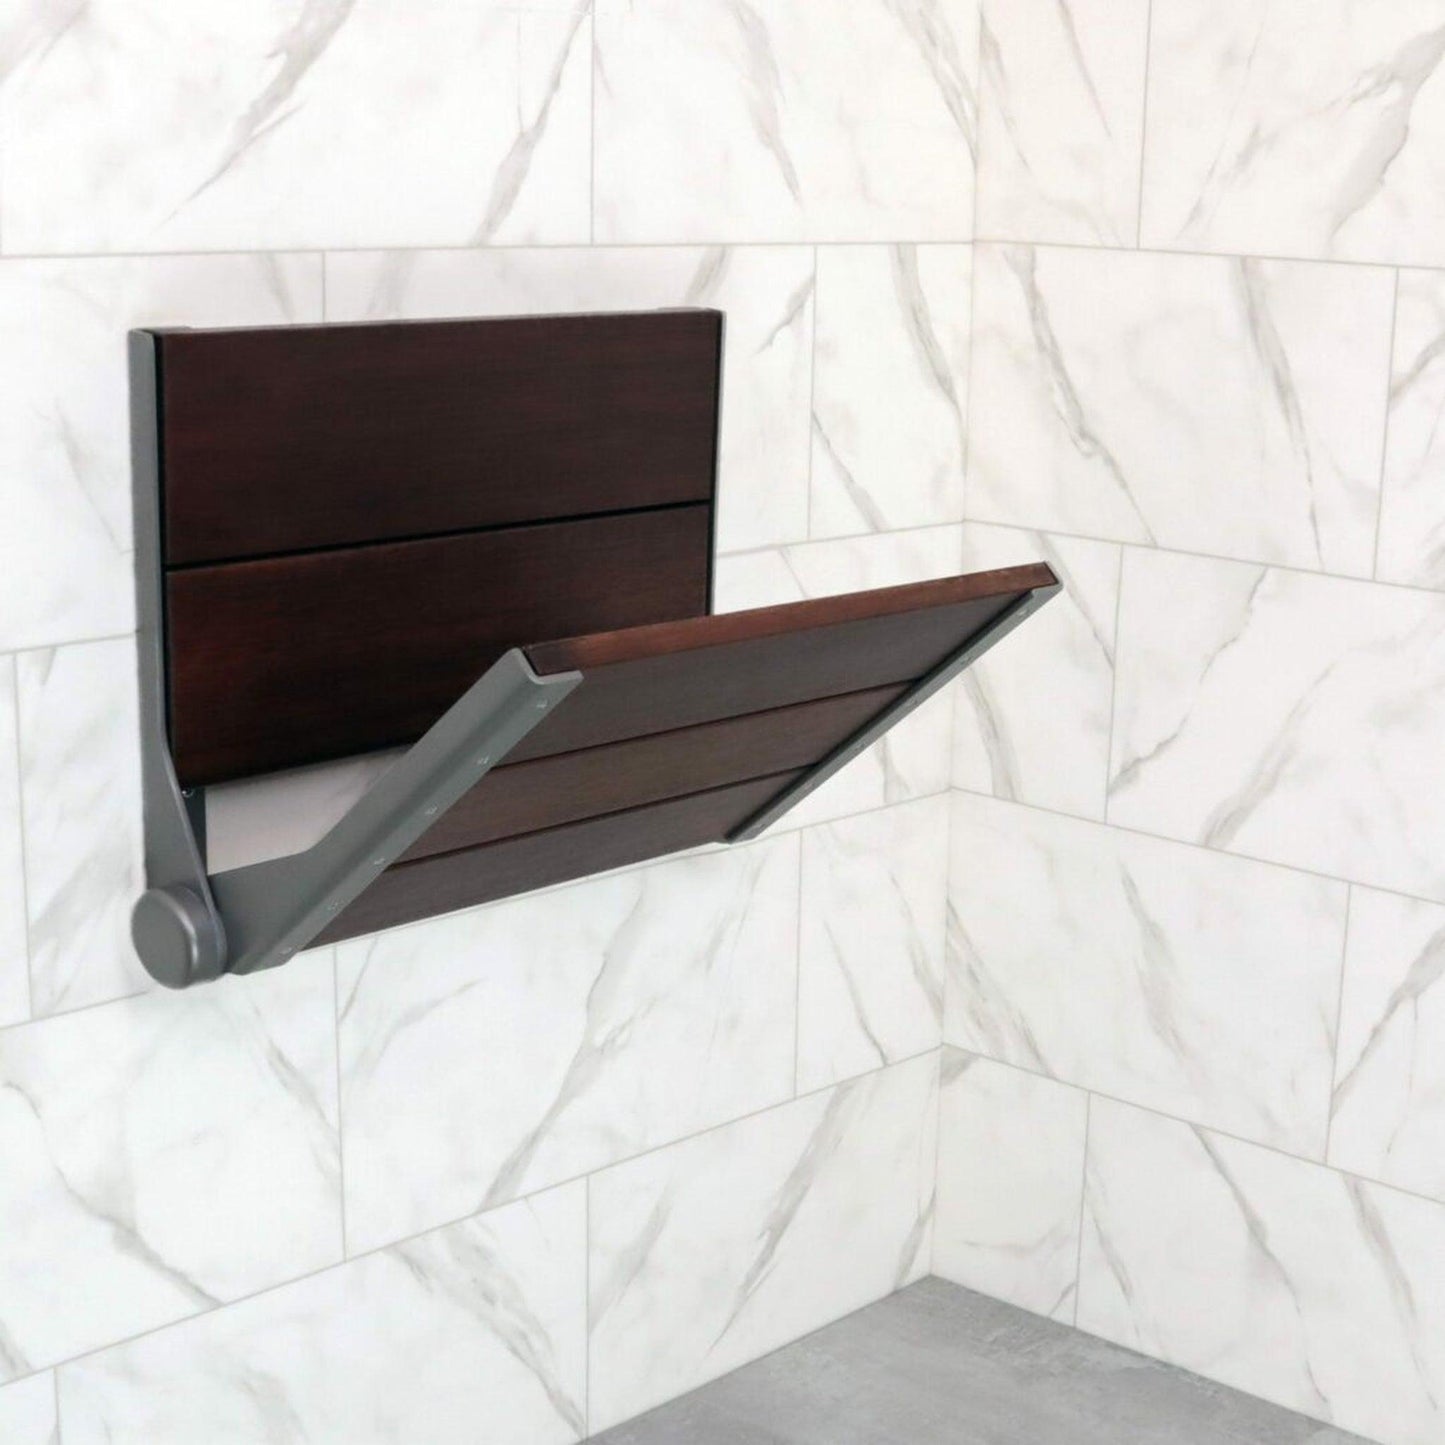 Invisia 26" Rectangle Walnut Stained Bamboo Wall-Mounted SerenaSeat Fold Down Shower Seat With Oil Rubbed Bronze Frame